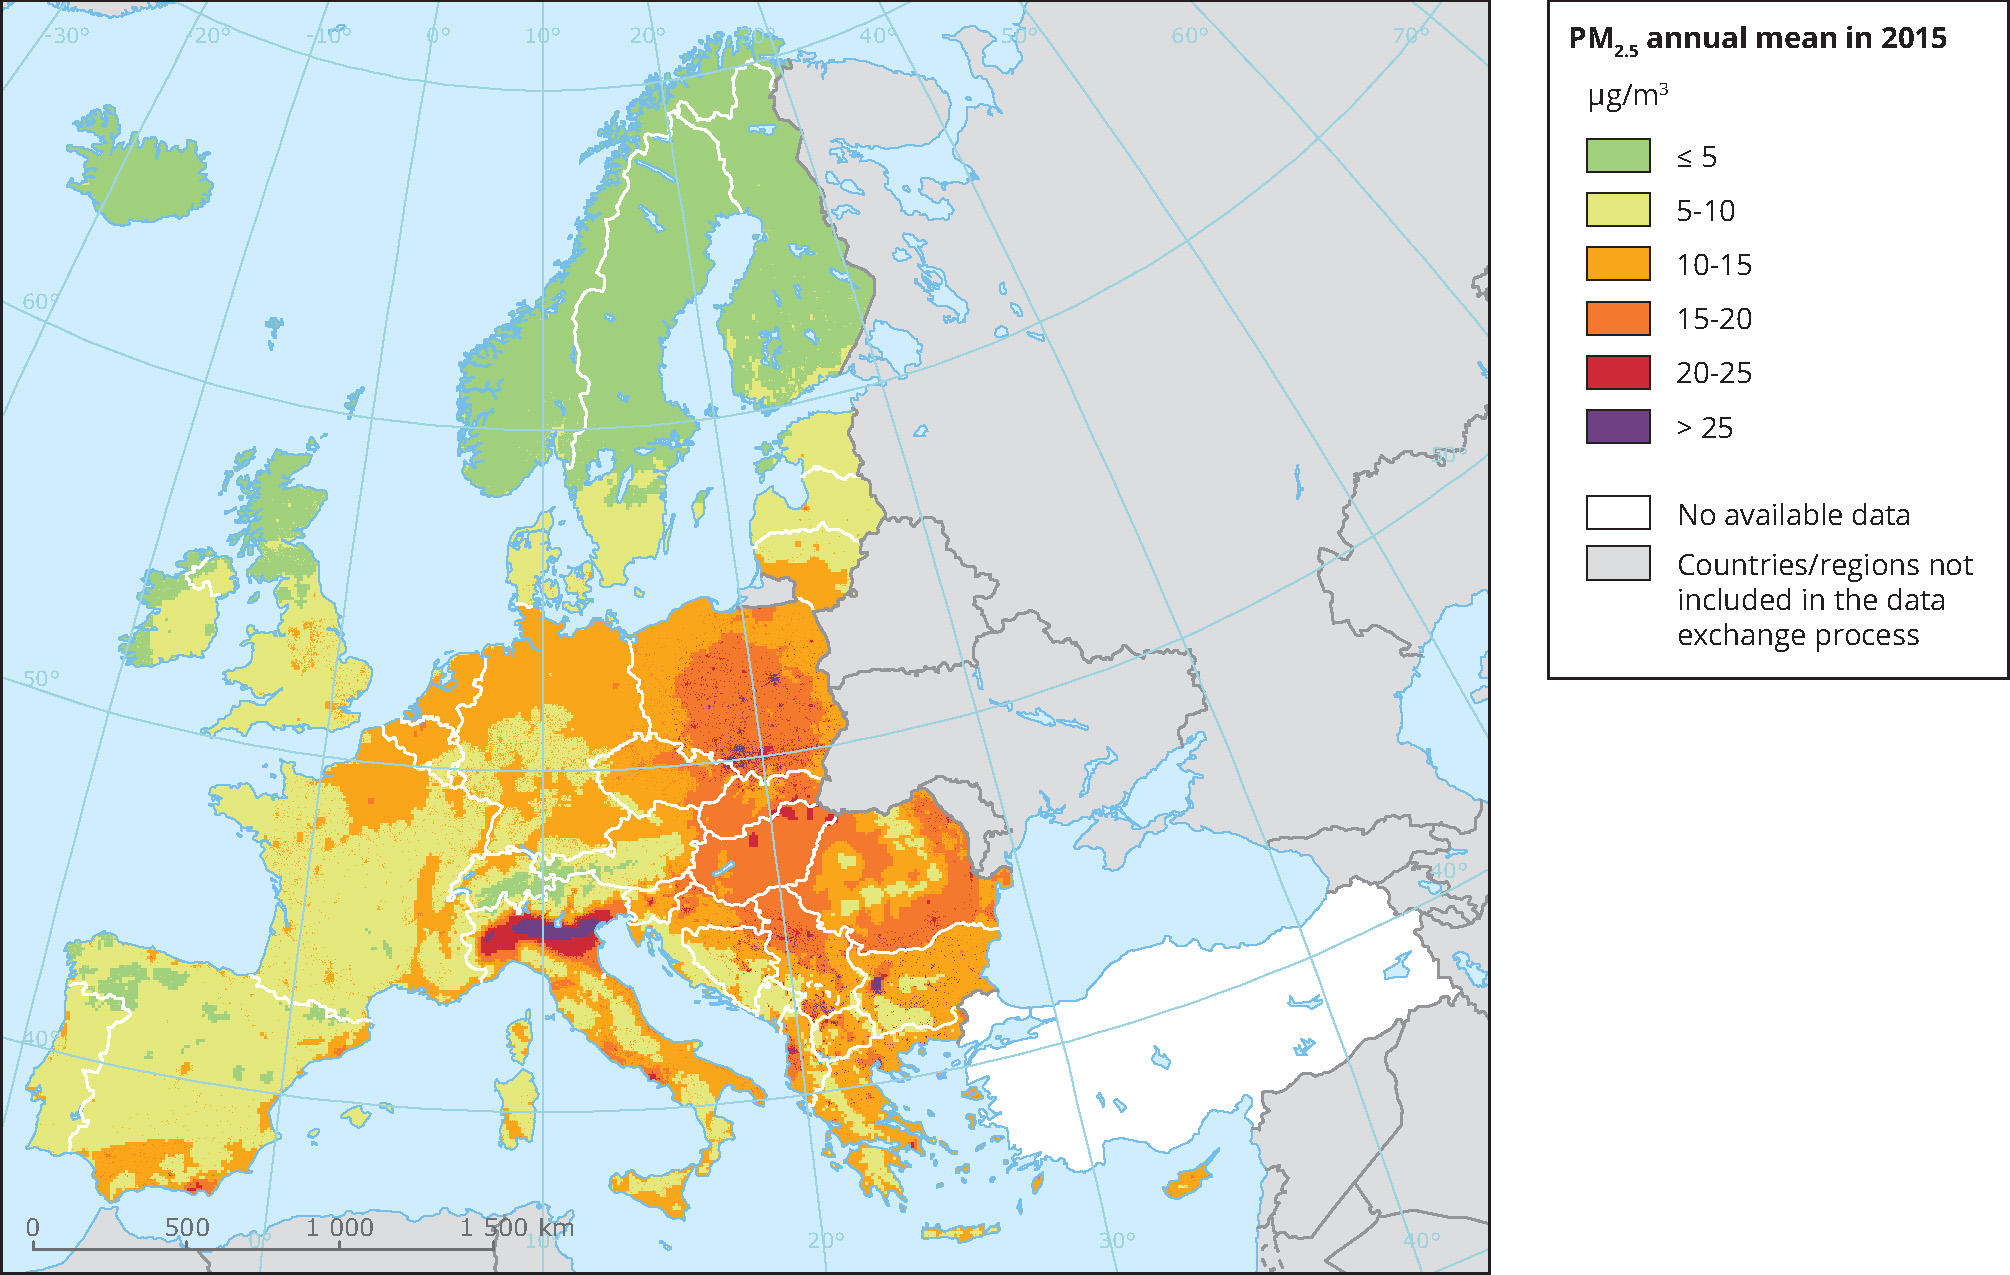 Europe air pollution levels for 2.5PM particles in 2015